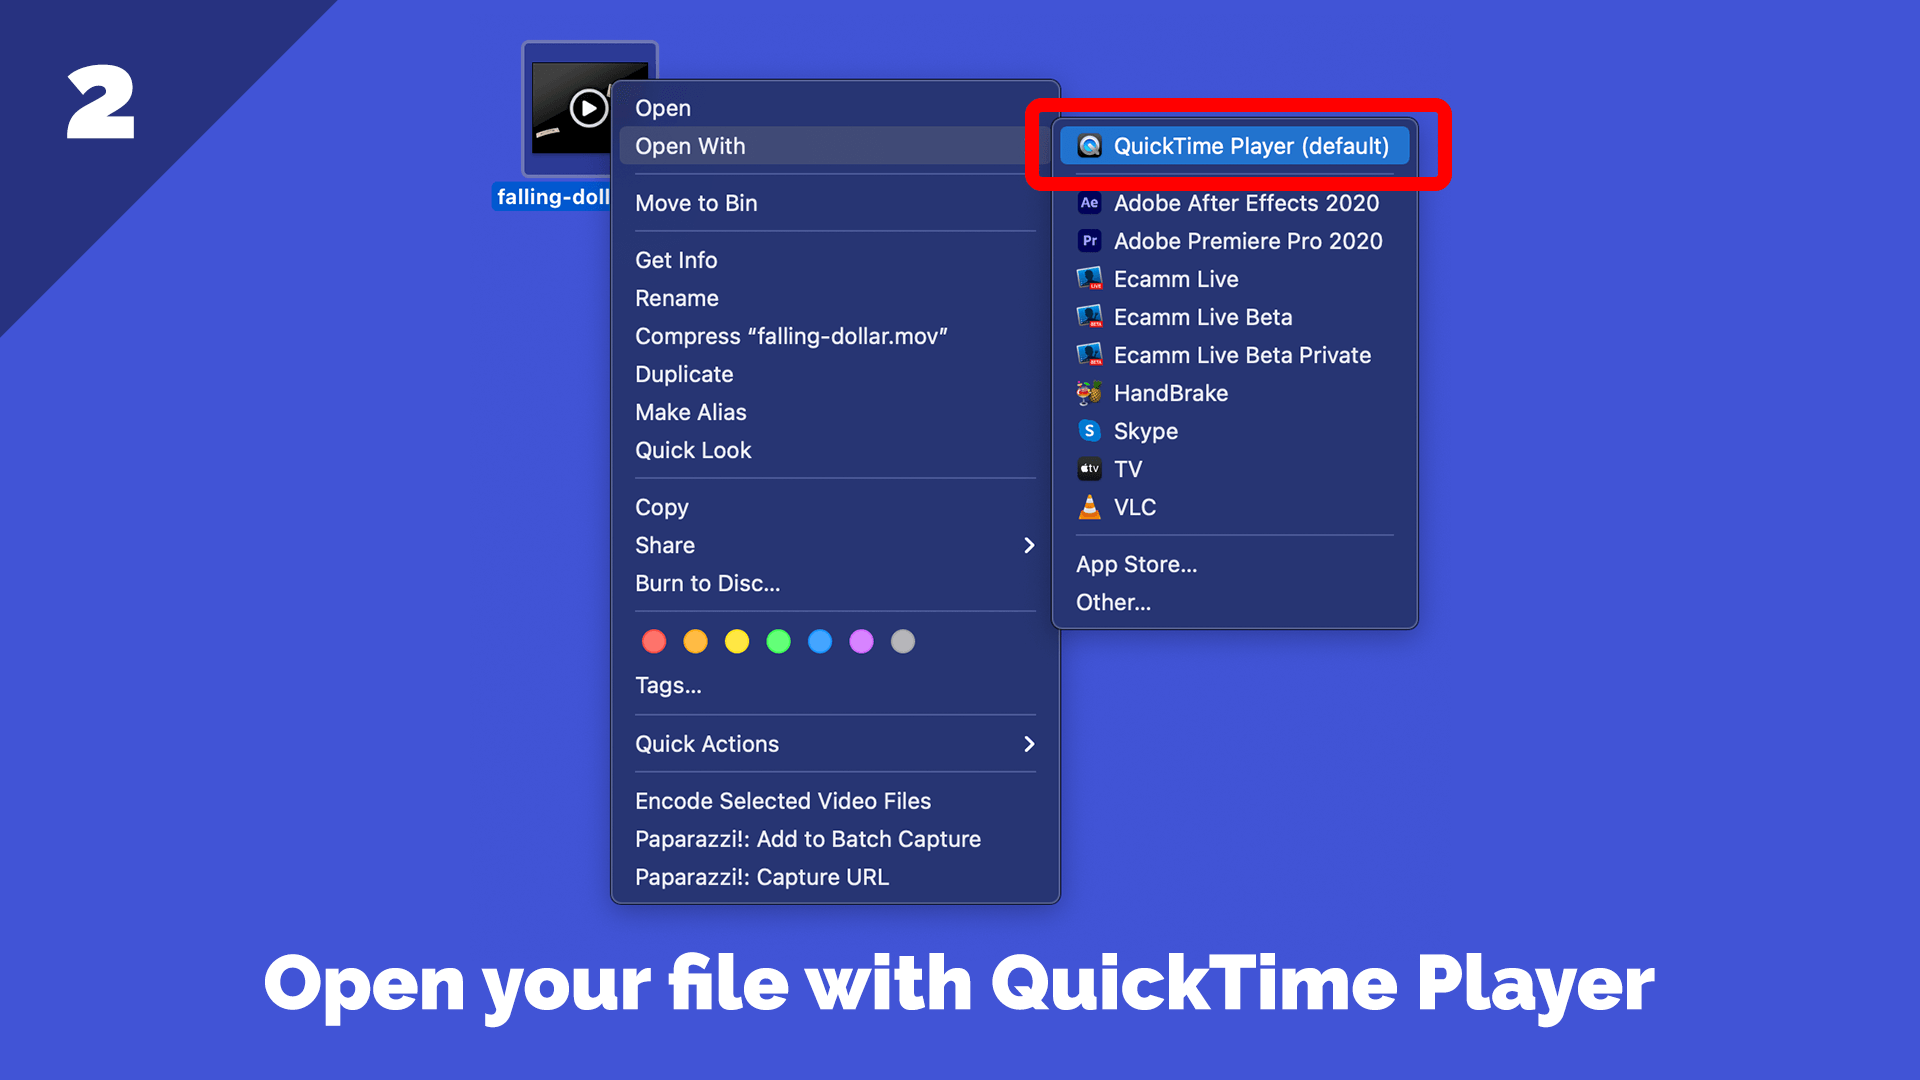 Open your file in QuickTime